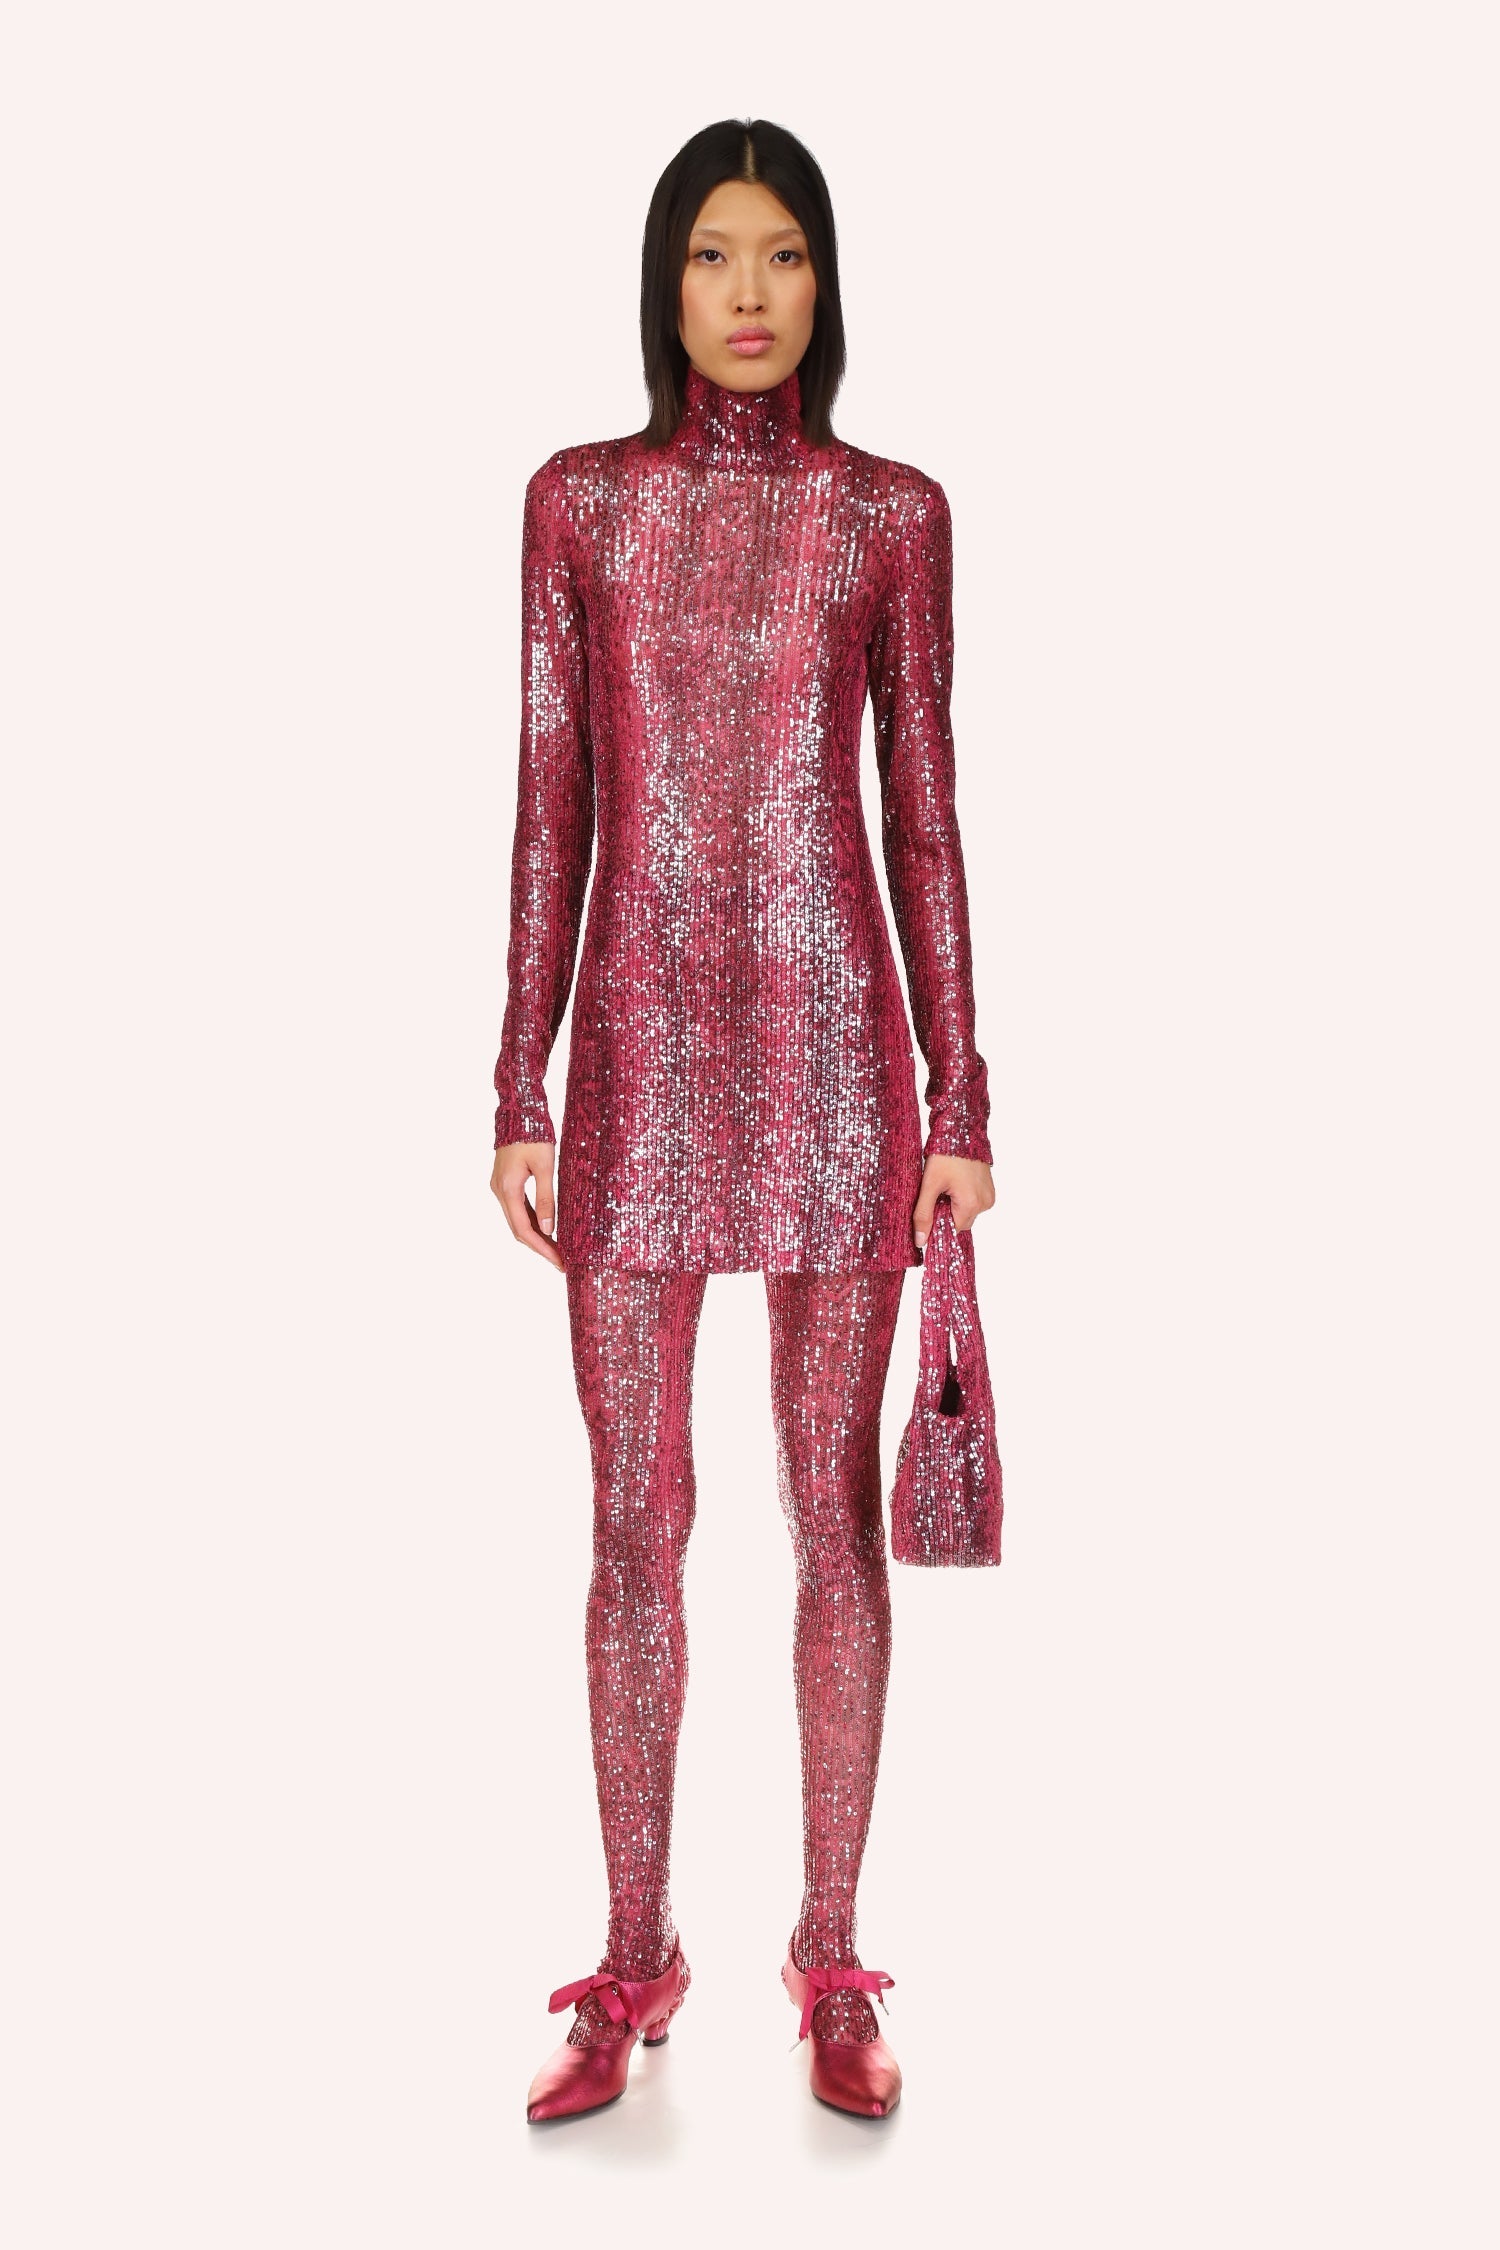 The Snakeskin Sequin Turtleneck is a shiny mini dress, featuring a ruby red color, long sleeves and a turtleneck collar